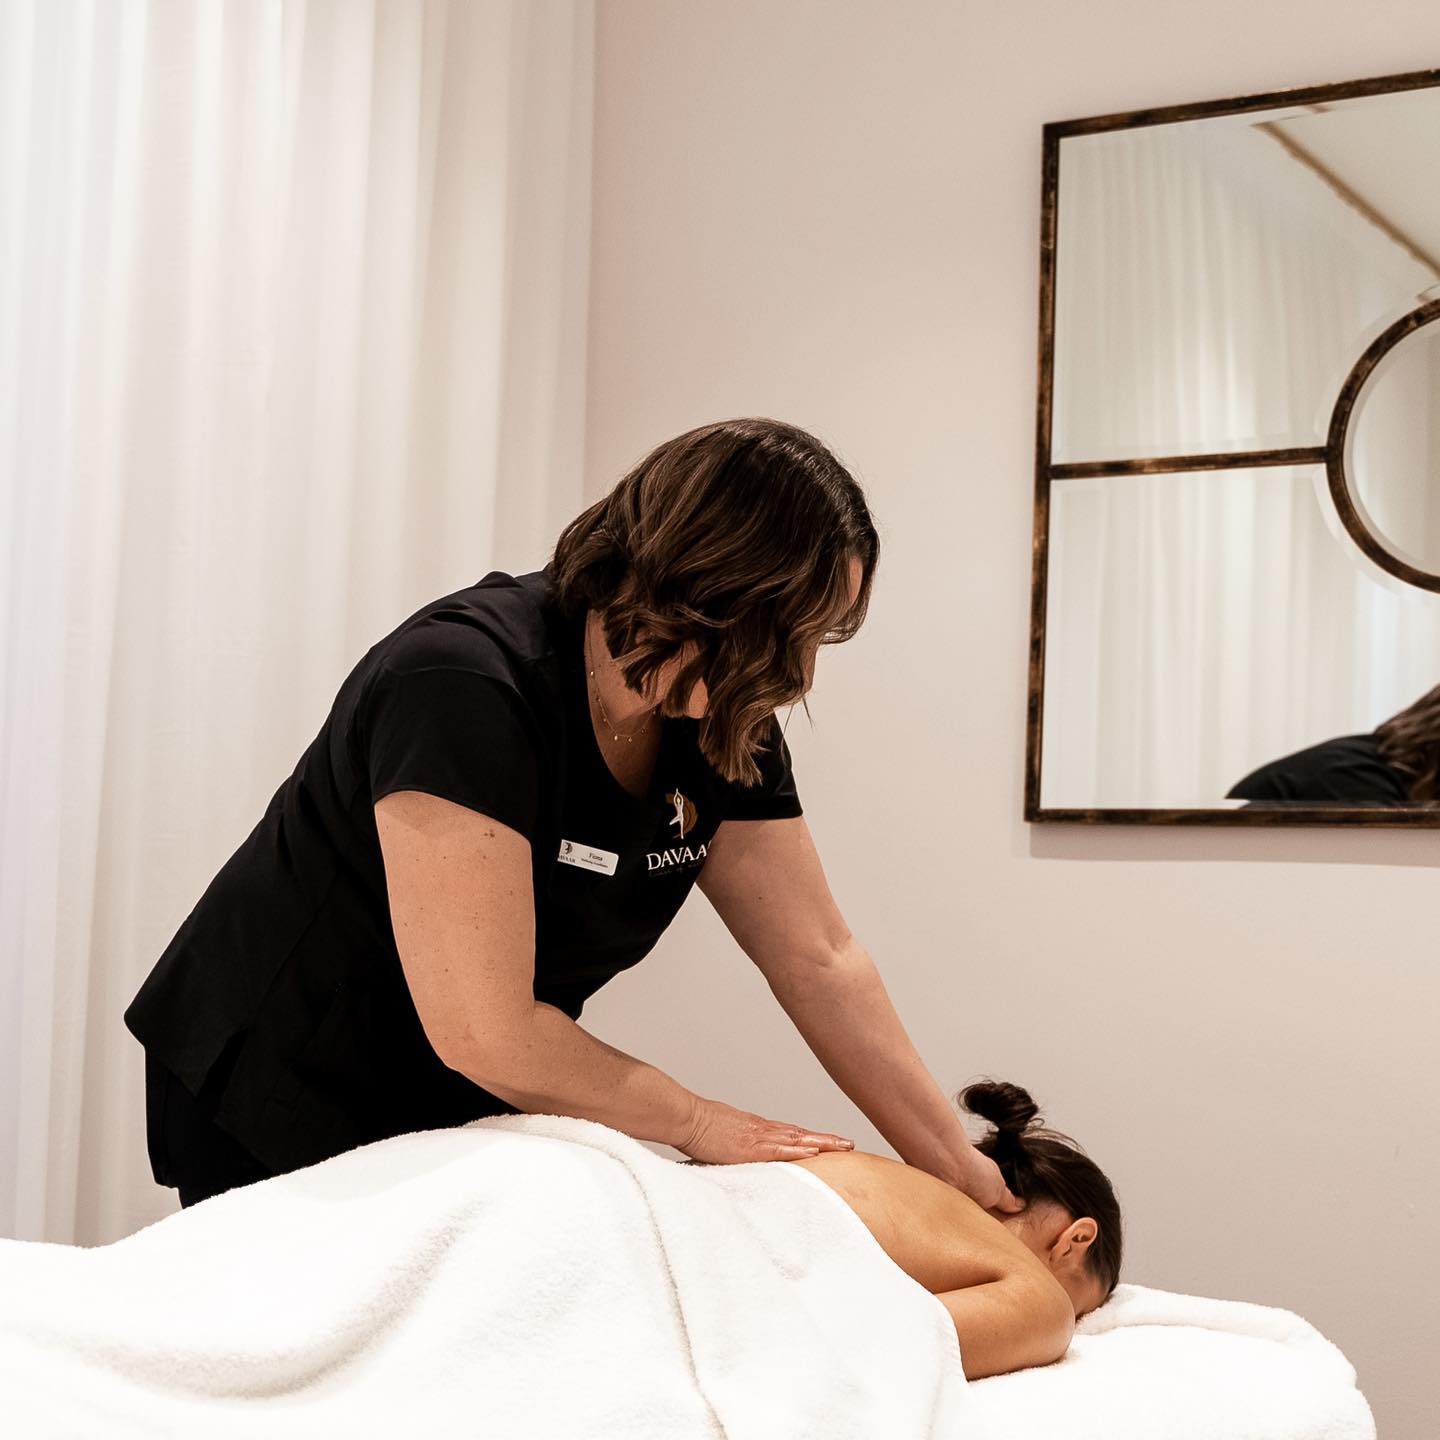 WIN signature Davaar massages for you and three friends, valued at over $600!